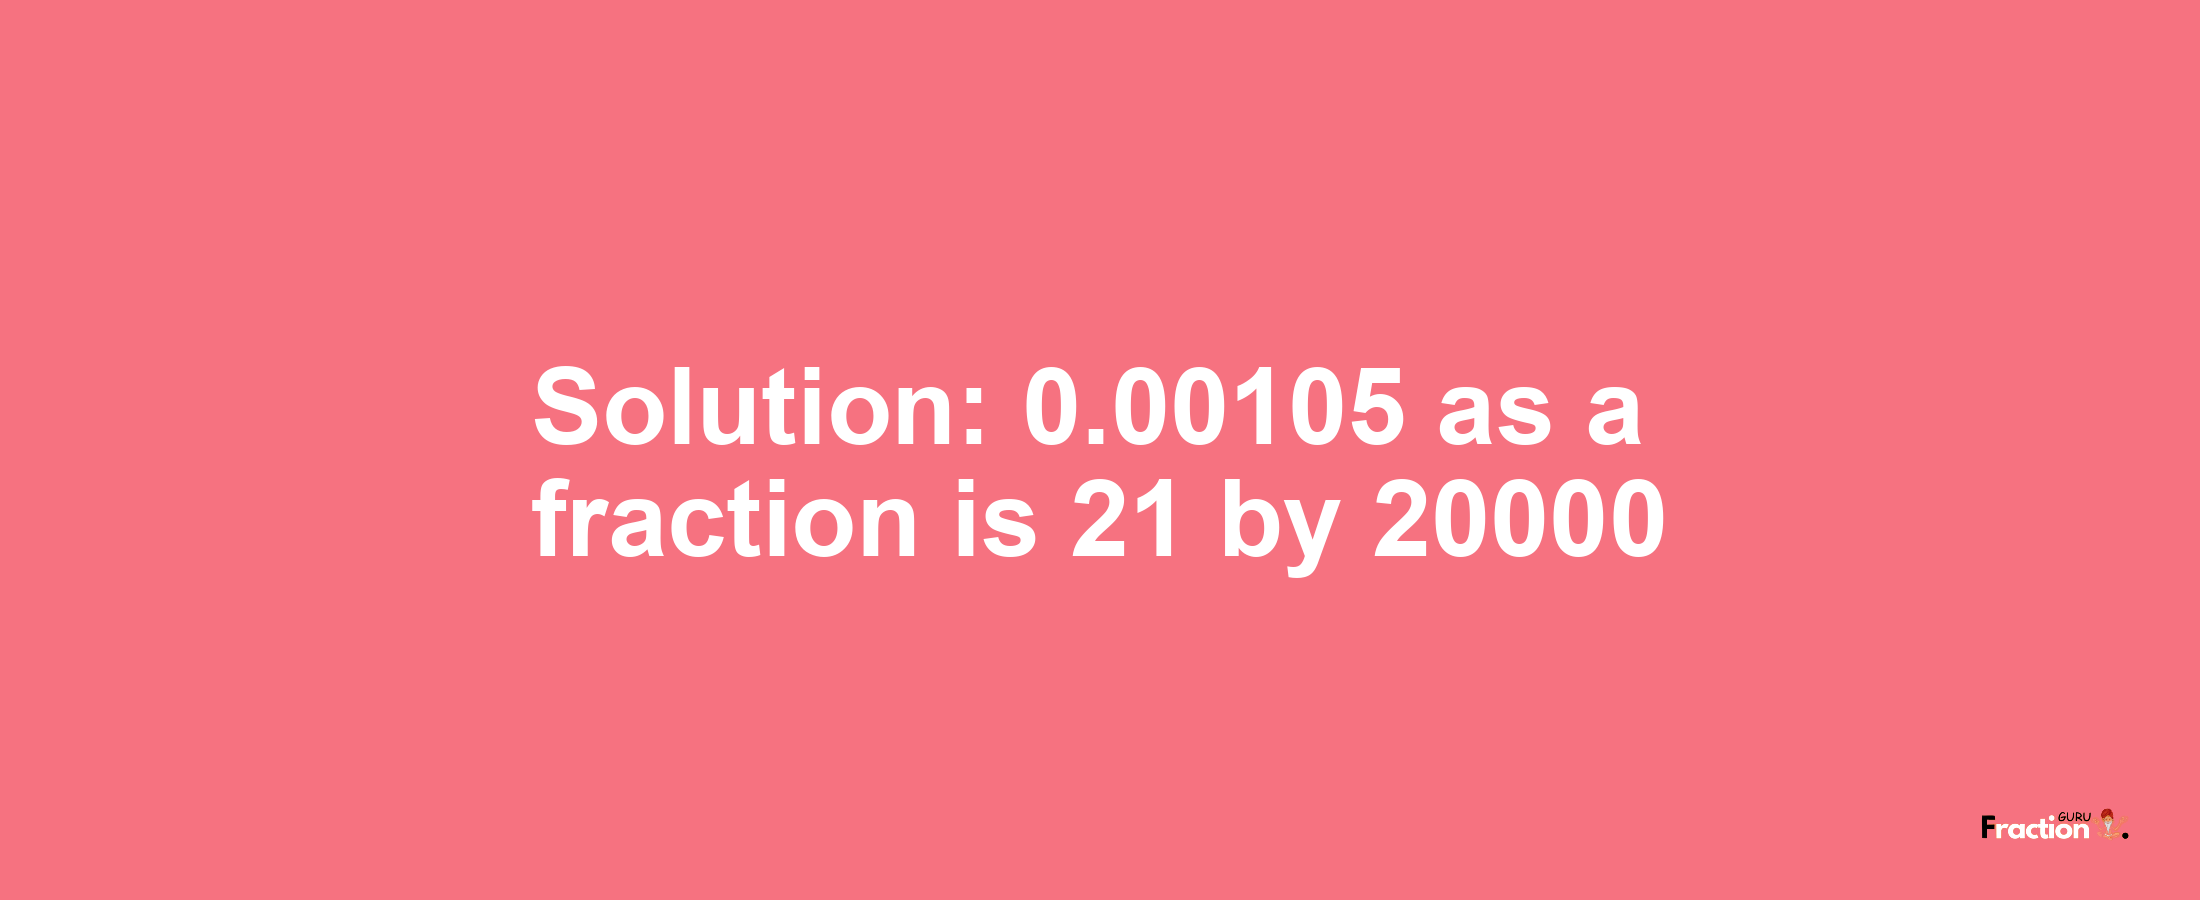 Solution:0.00105 as a fraction is 21/20000